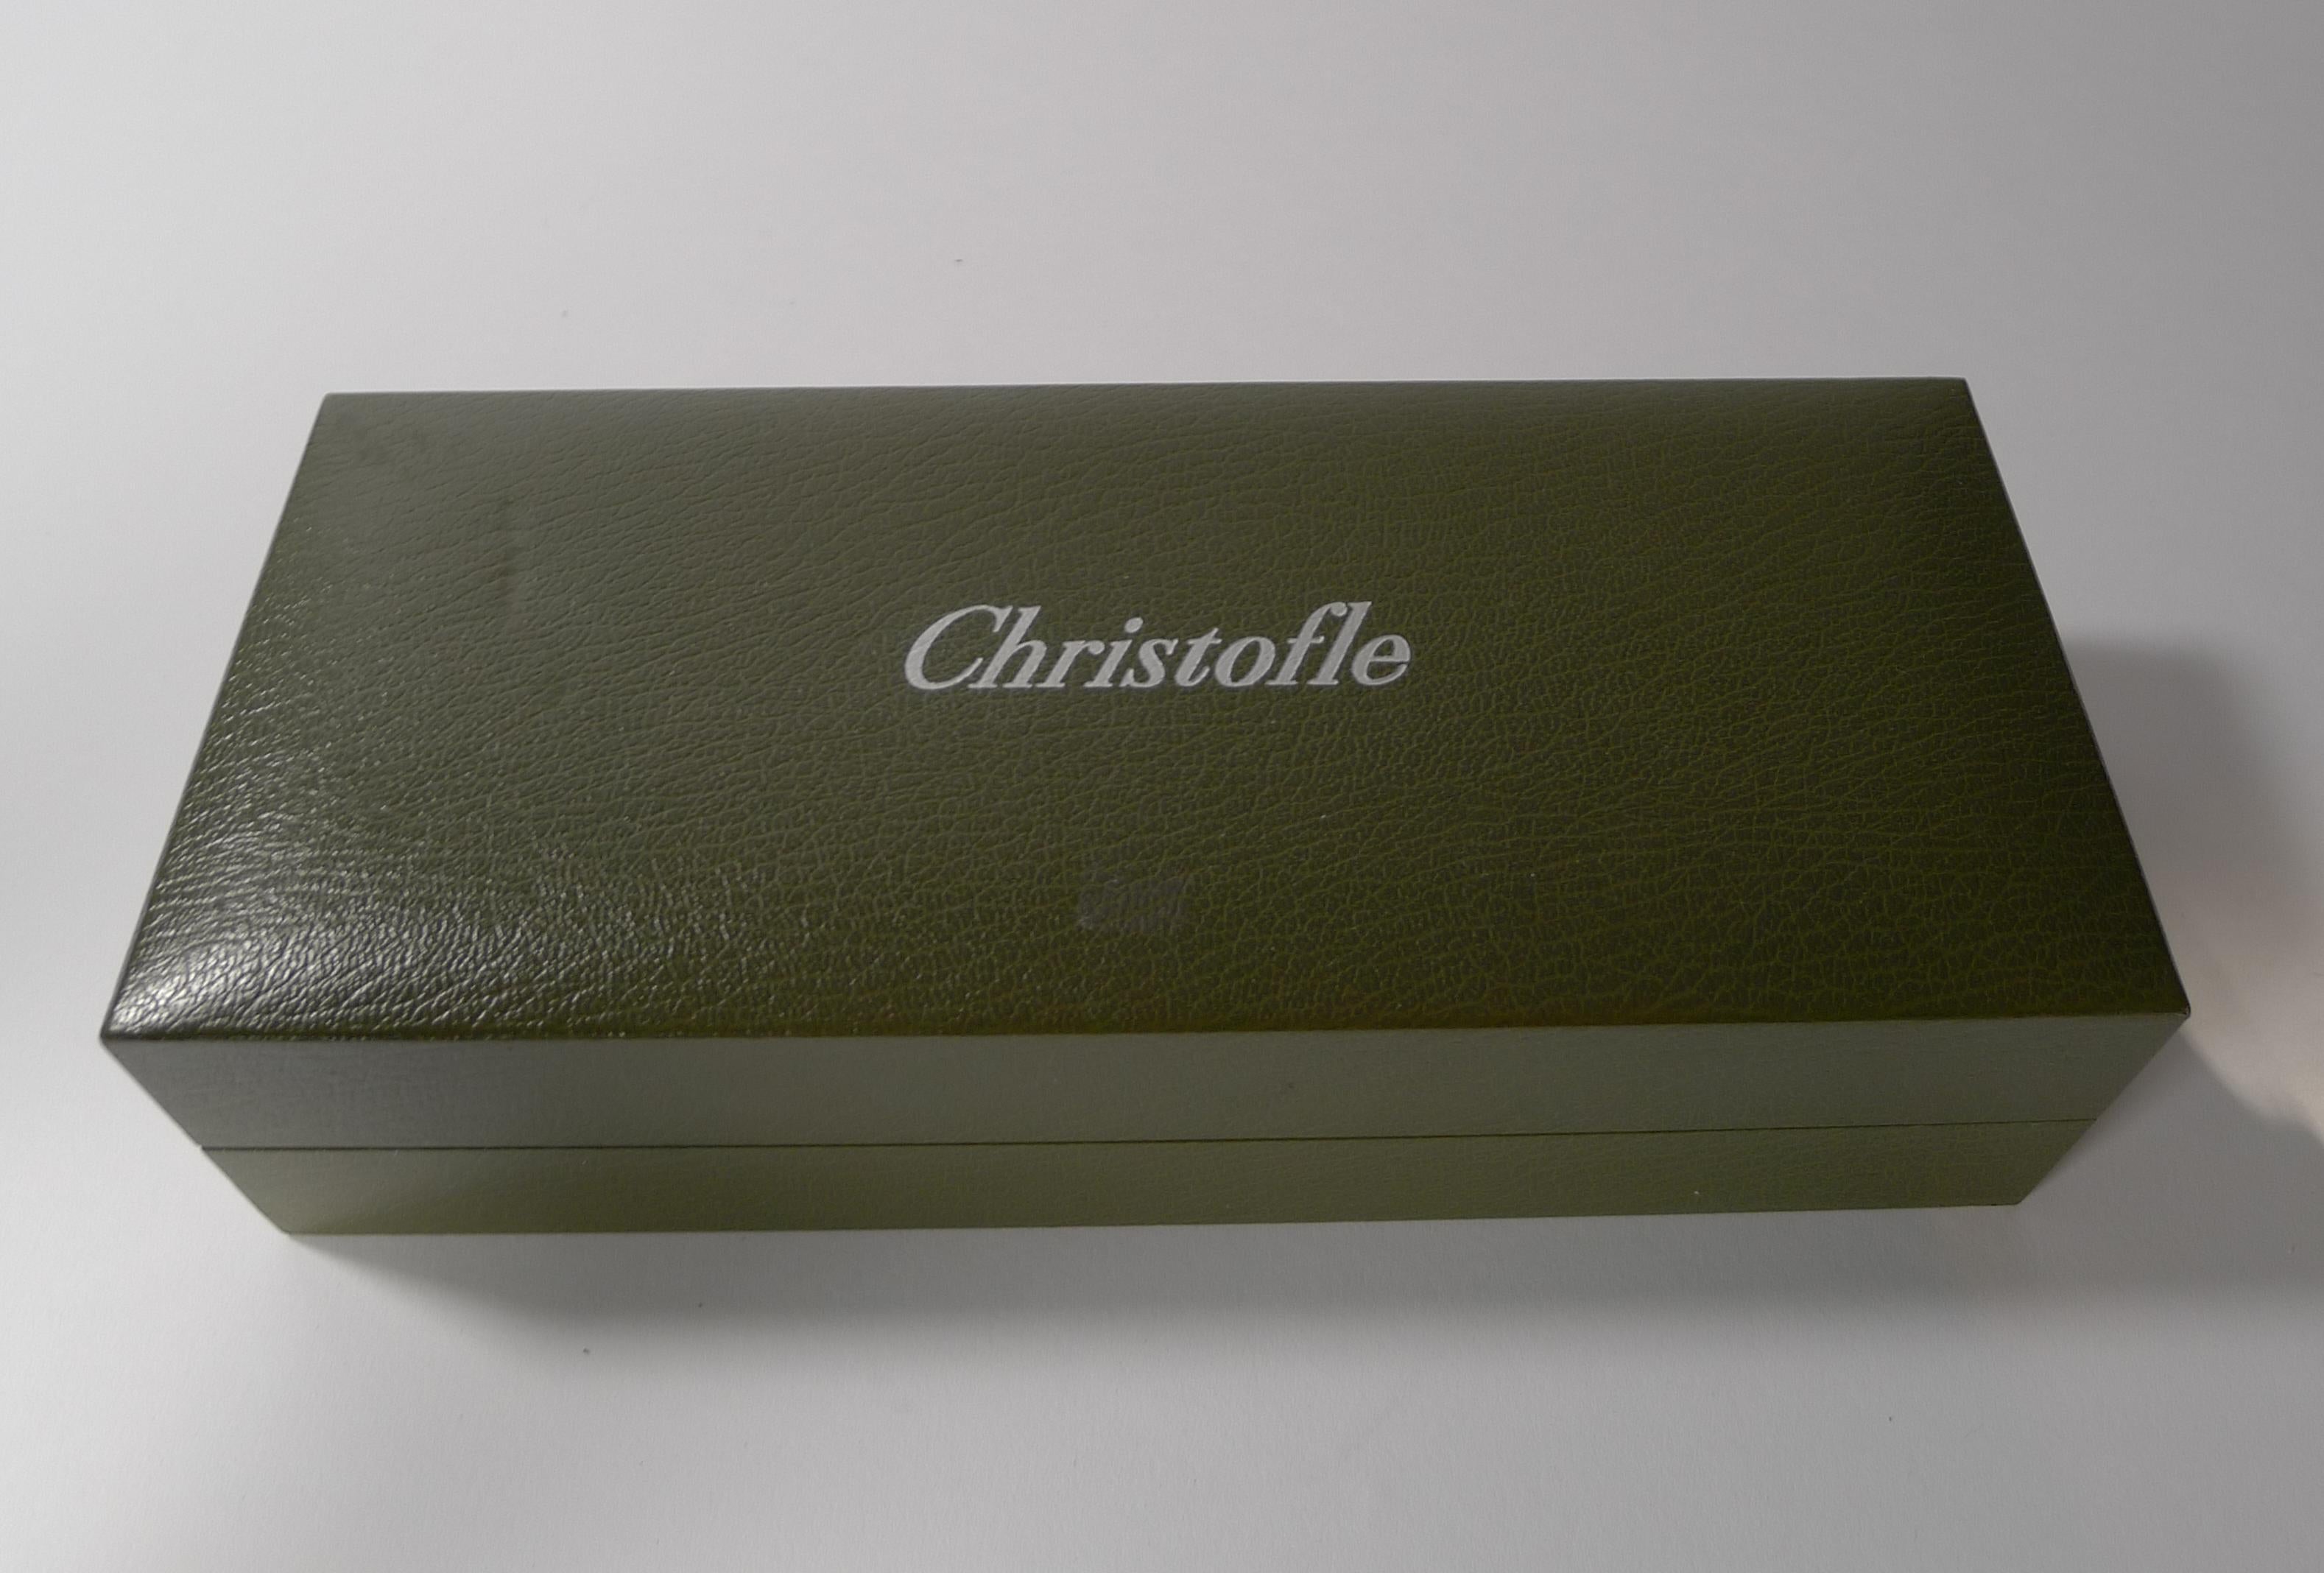 A fabulous vintage silver plated individual cigar case, an iconic design from the late 20th century circa 1980s fully marked by the famous top-notch French Maison Christofle, Paris.

Complete in it's original box. The cigar case measures 7 3/4